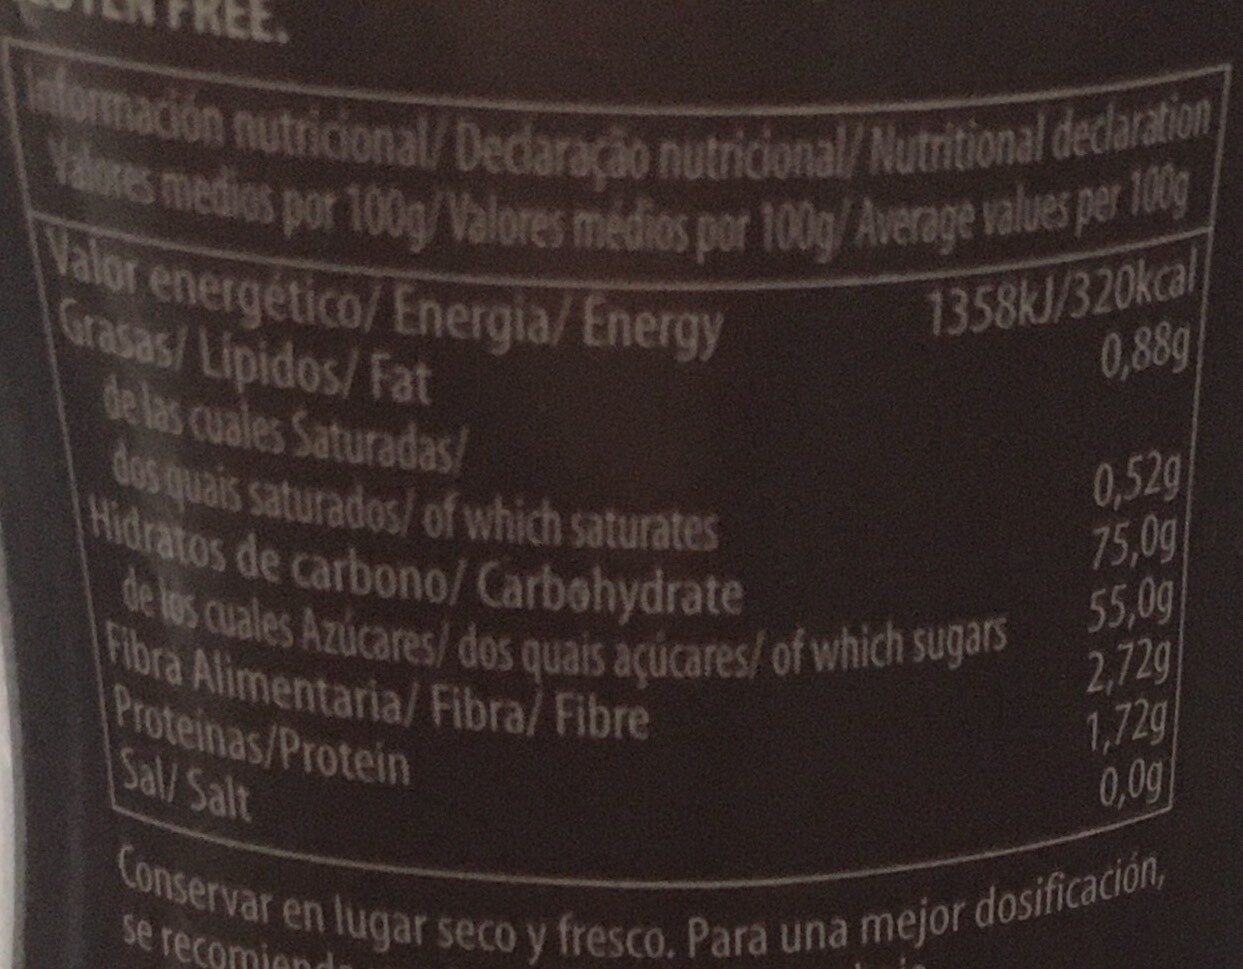 Sirope chocolate - Nutrition facts - es